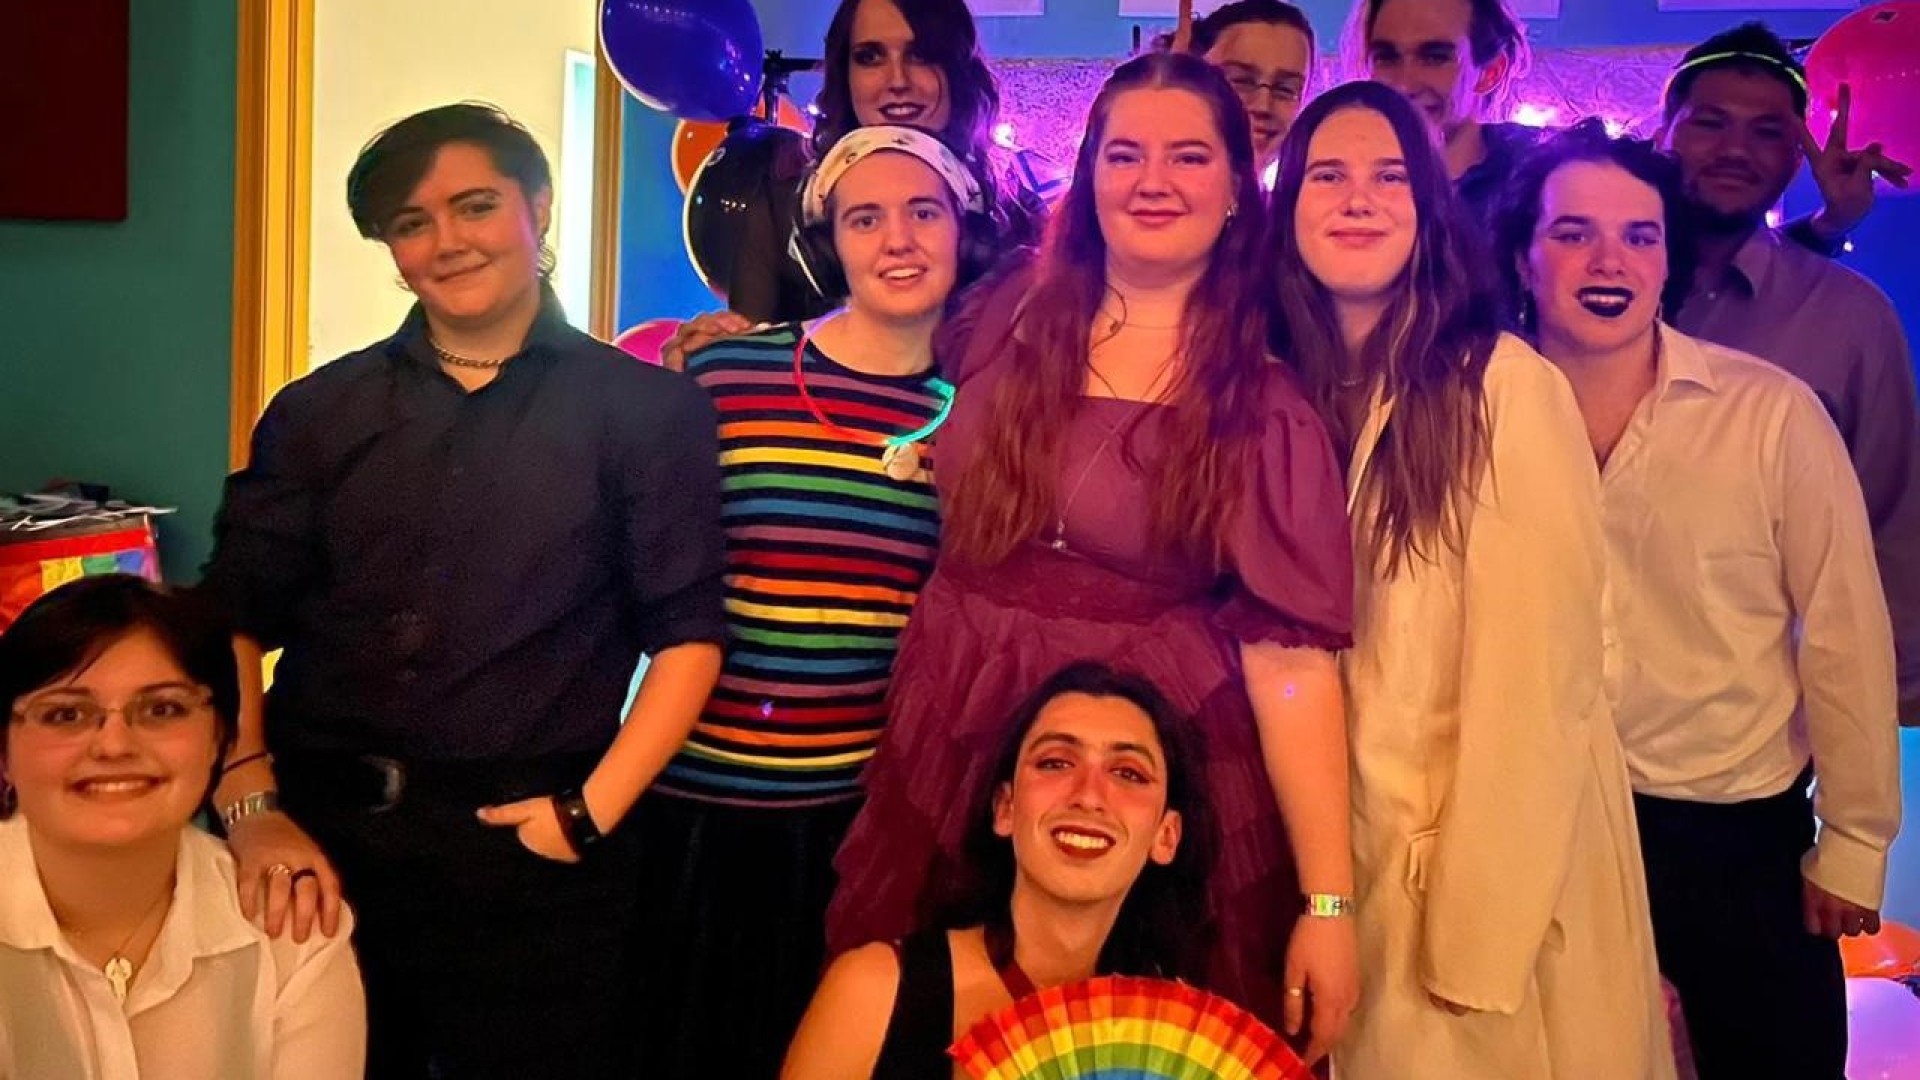 Students at Queer Prom